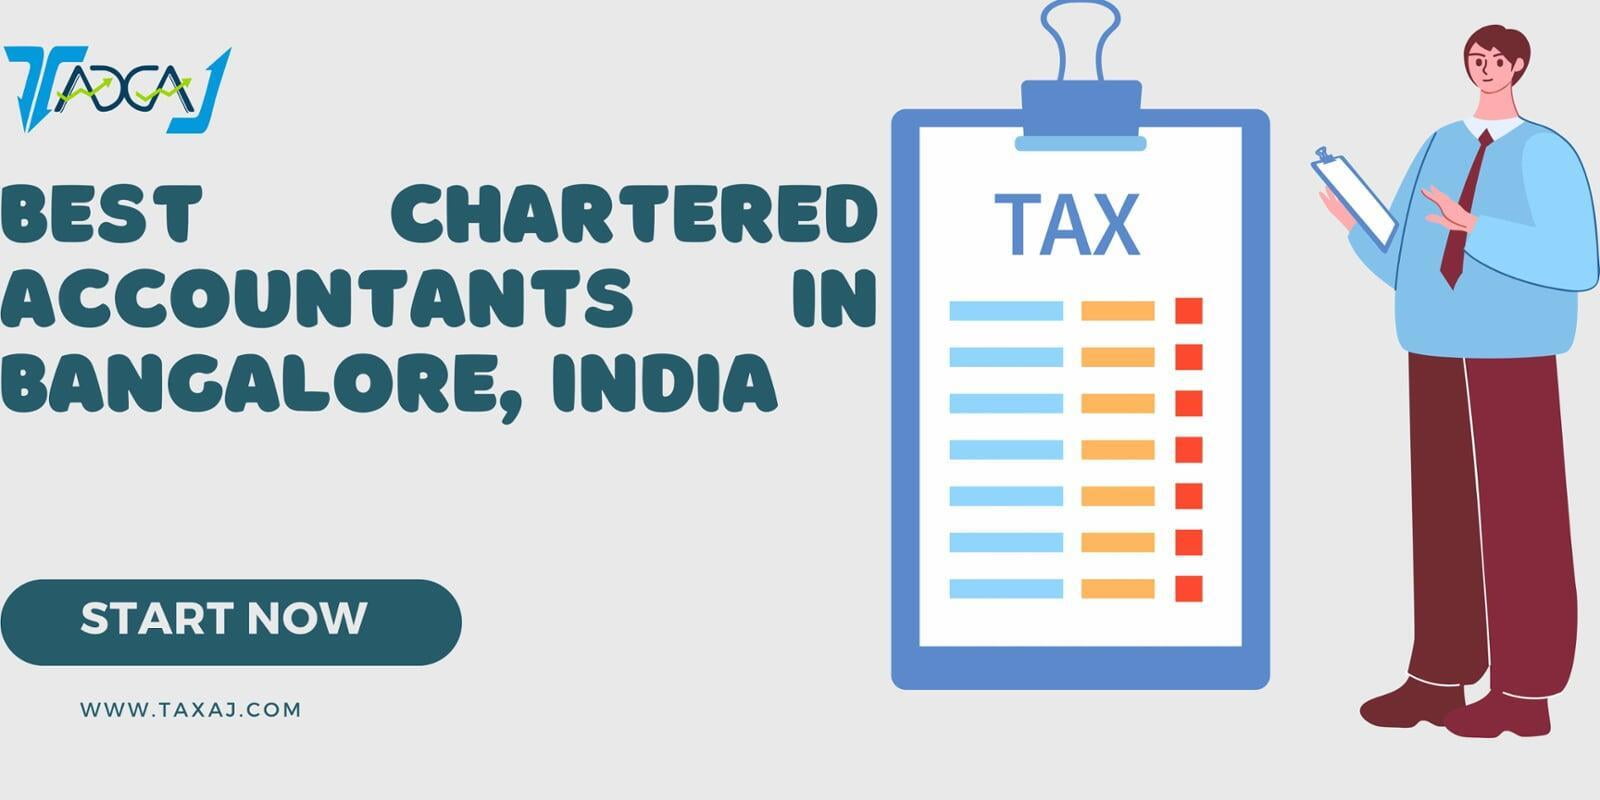 Best Chartered Accountants in Bangalore